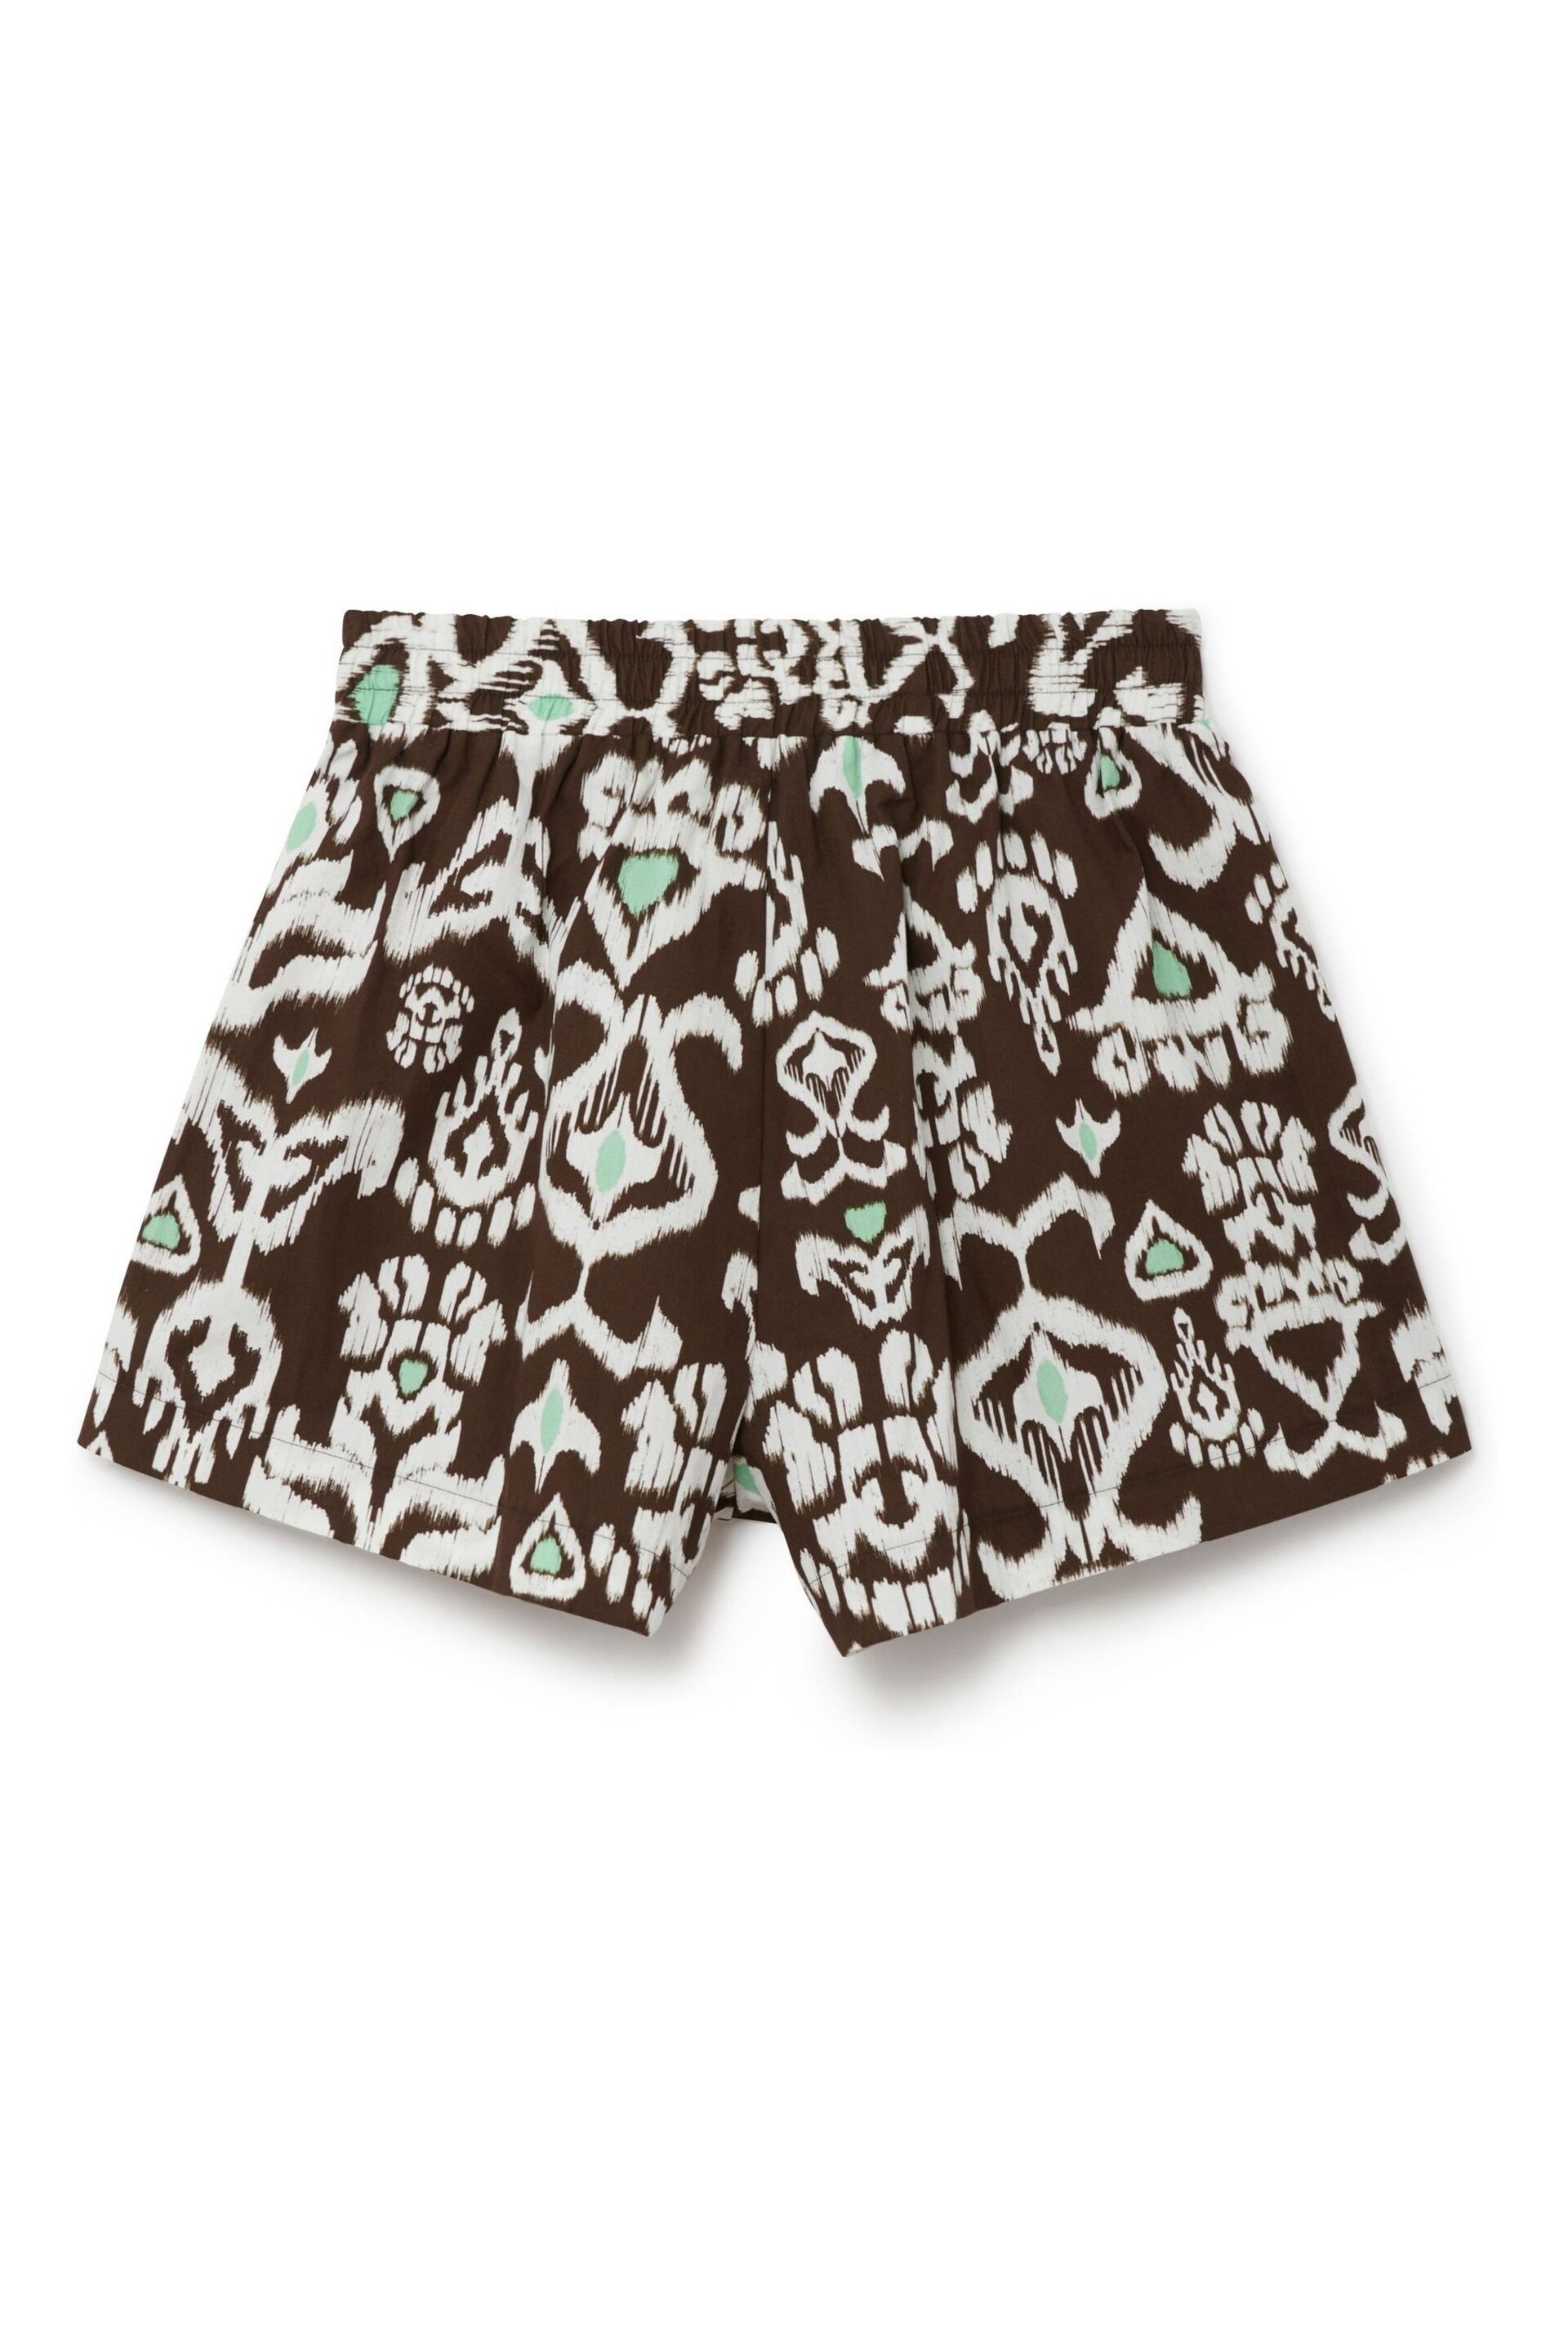 Another Sunday High Waisted Shorts With Elasticated Tie Waist In Brown Geo Print - Image 5 of 6